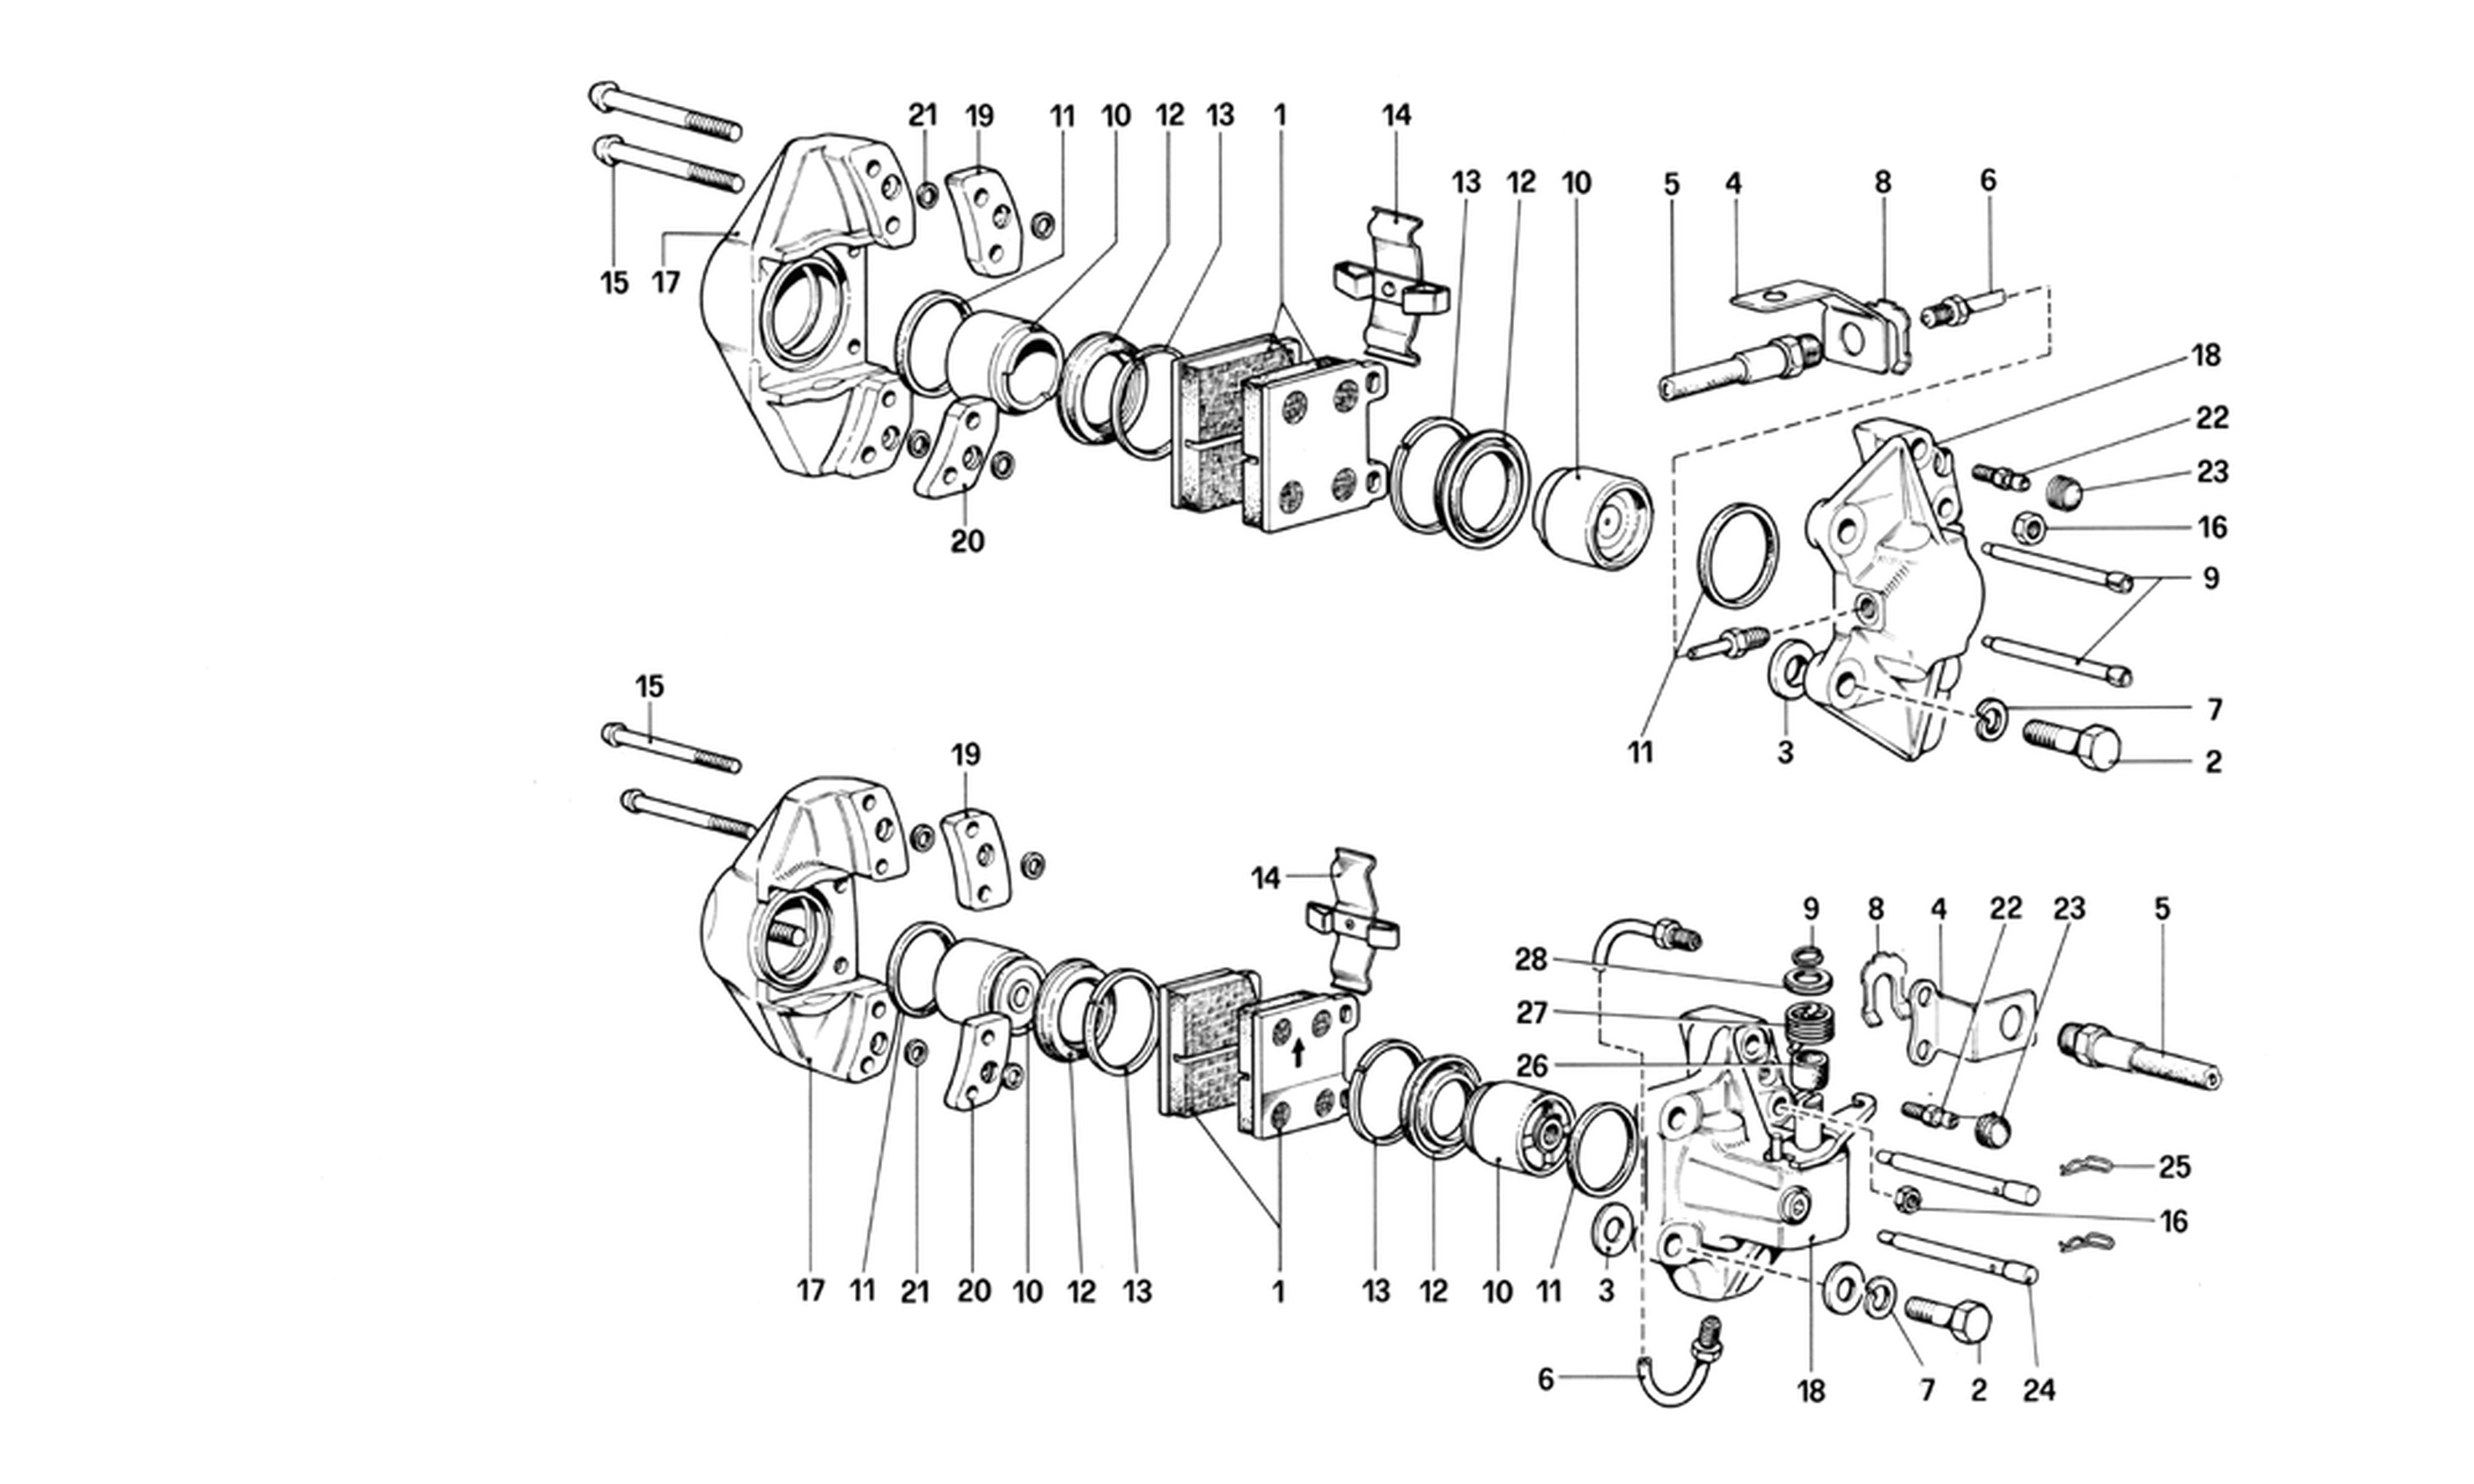 Schematic: Calipers For Front And Rear Brakes (Valid Only For Lhd Up To Chassis No. 43011)